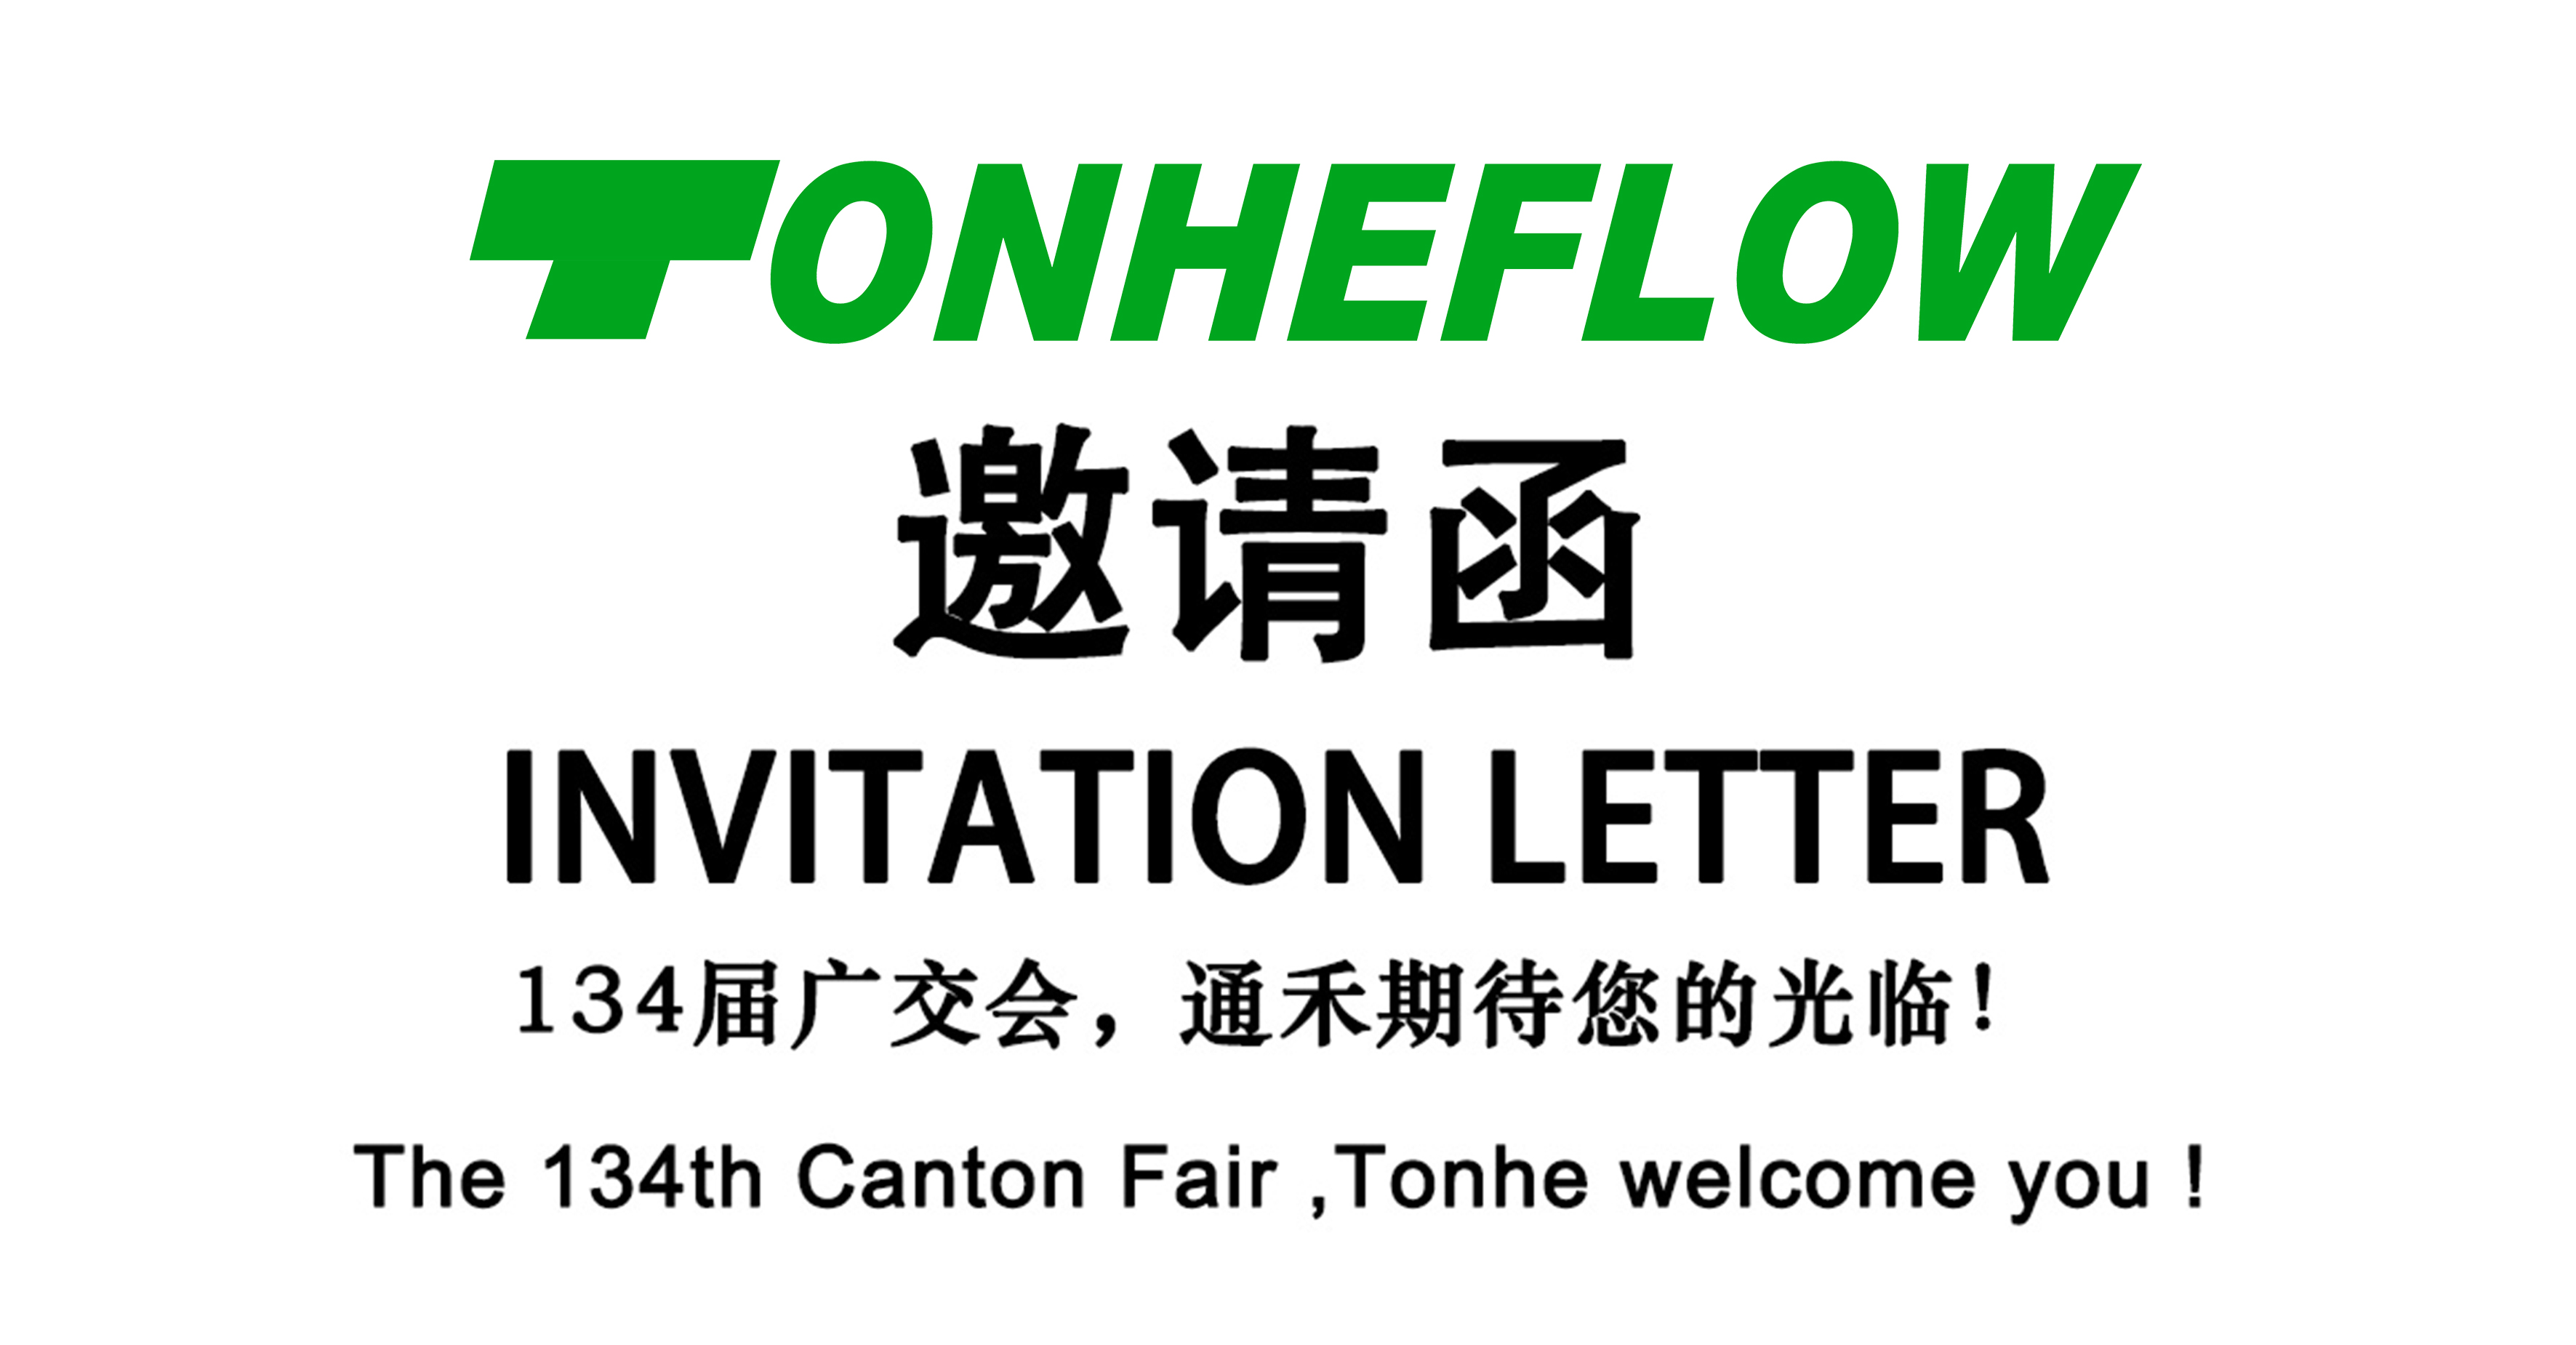 You have an invitation letter from Tonheflow Canton Fair, please kind note!